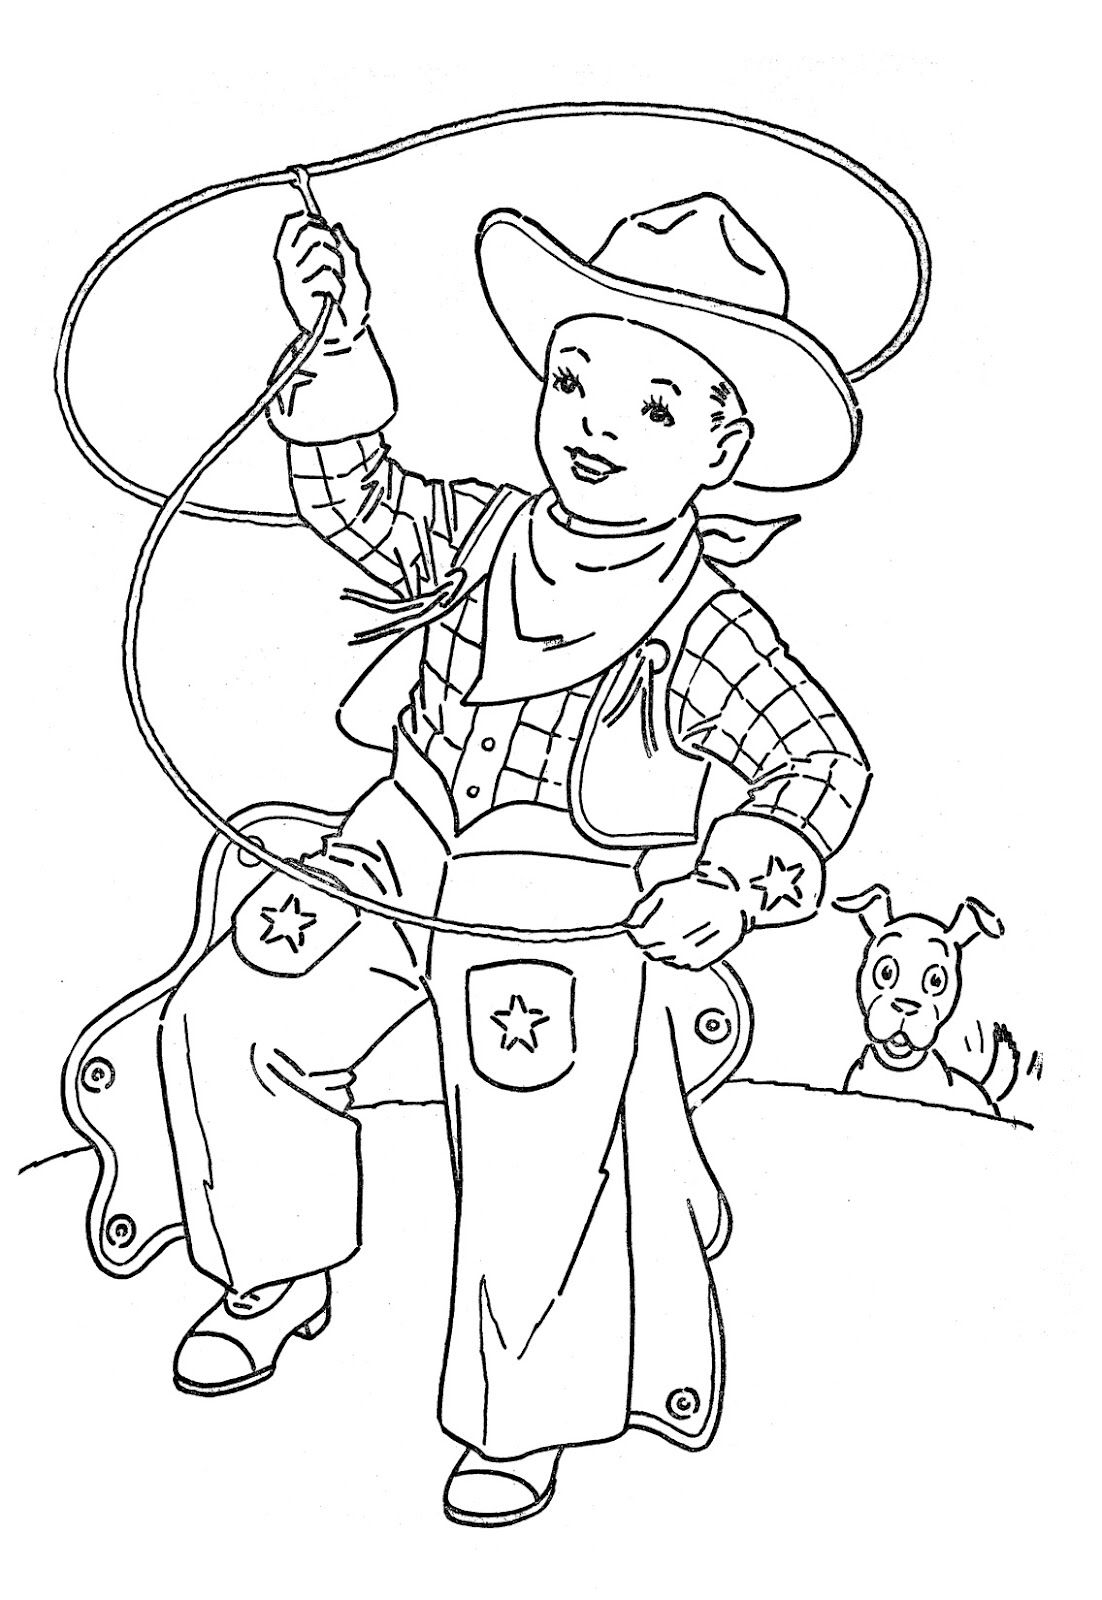 western coloring pages western coloring pages bestofcoloringcom western pages coloring 